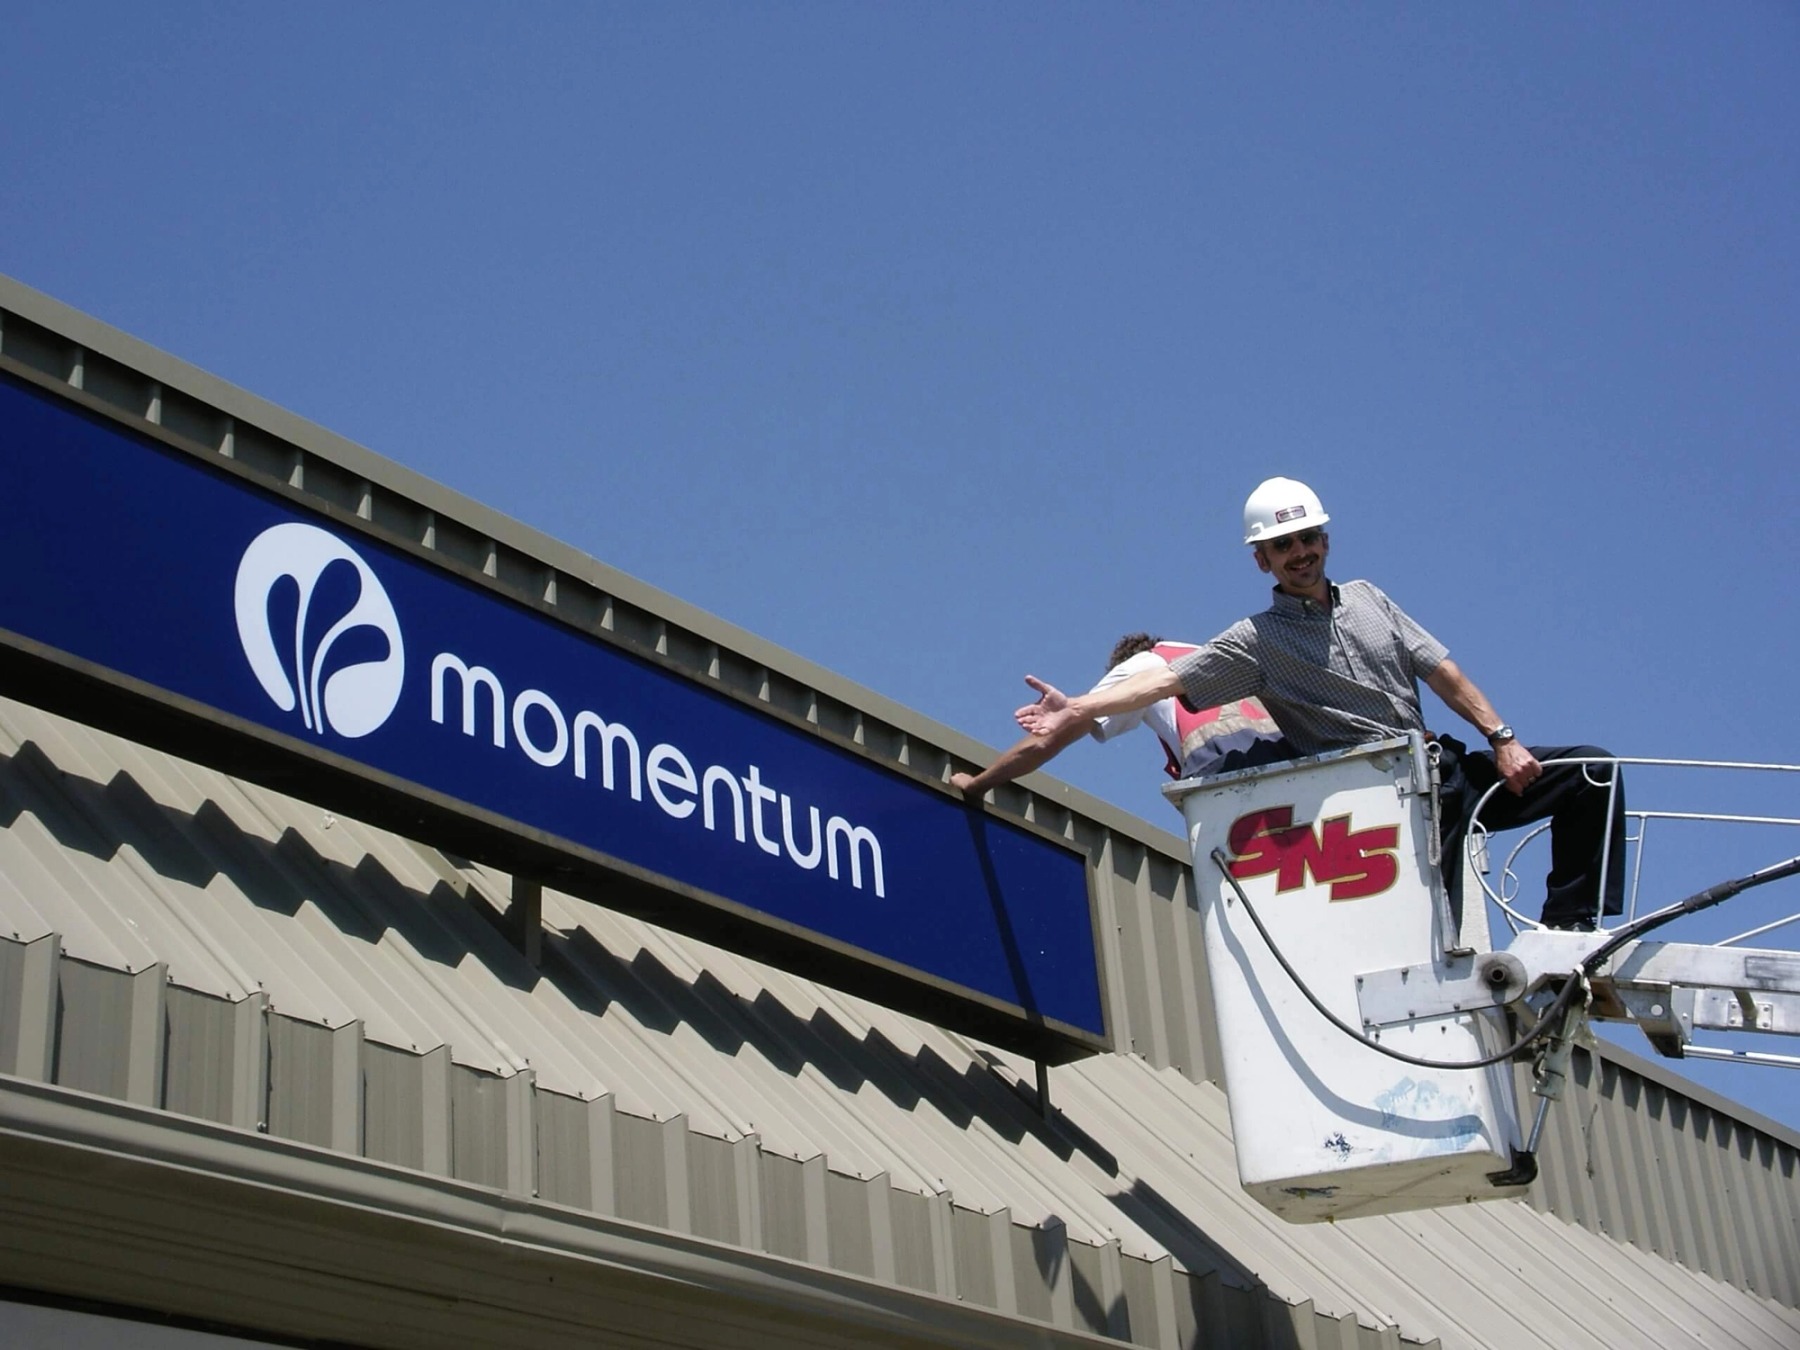 A worker in a hard hat gives a thumbs-up to new signage that's gone up at the Momentum building.